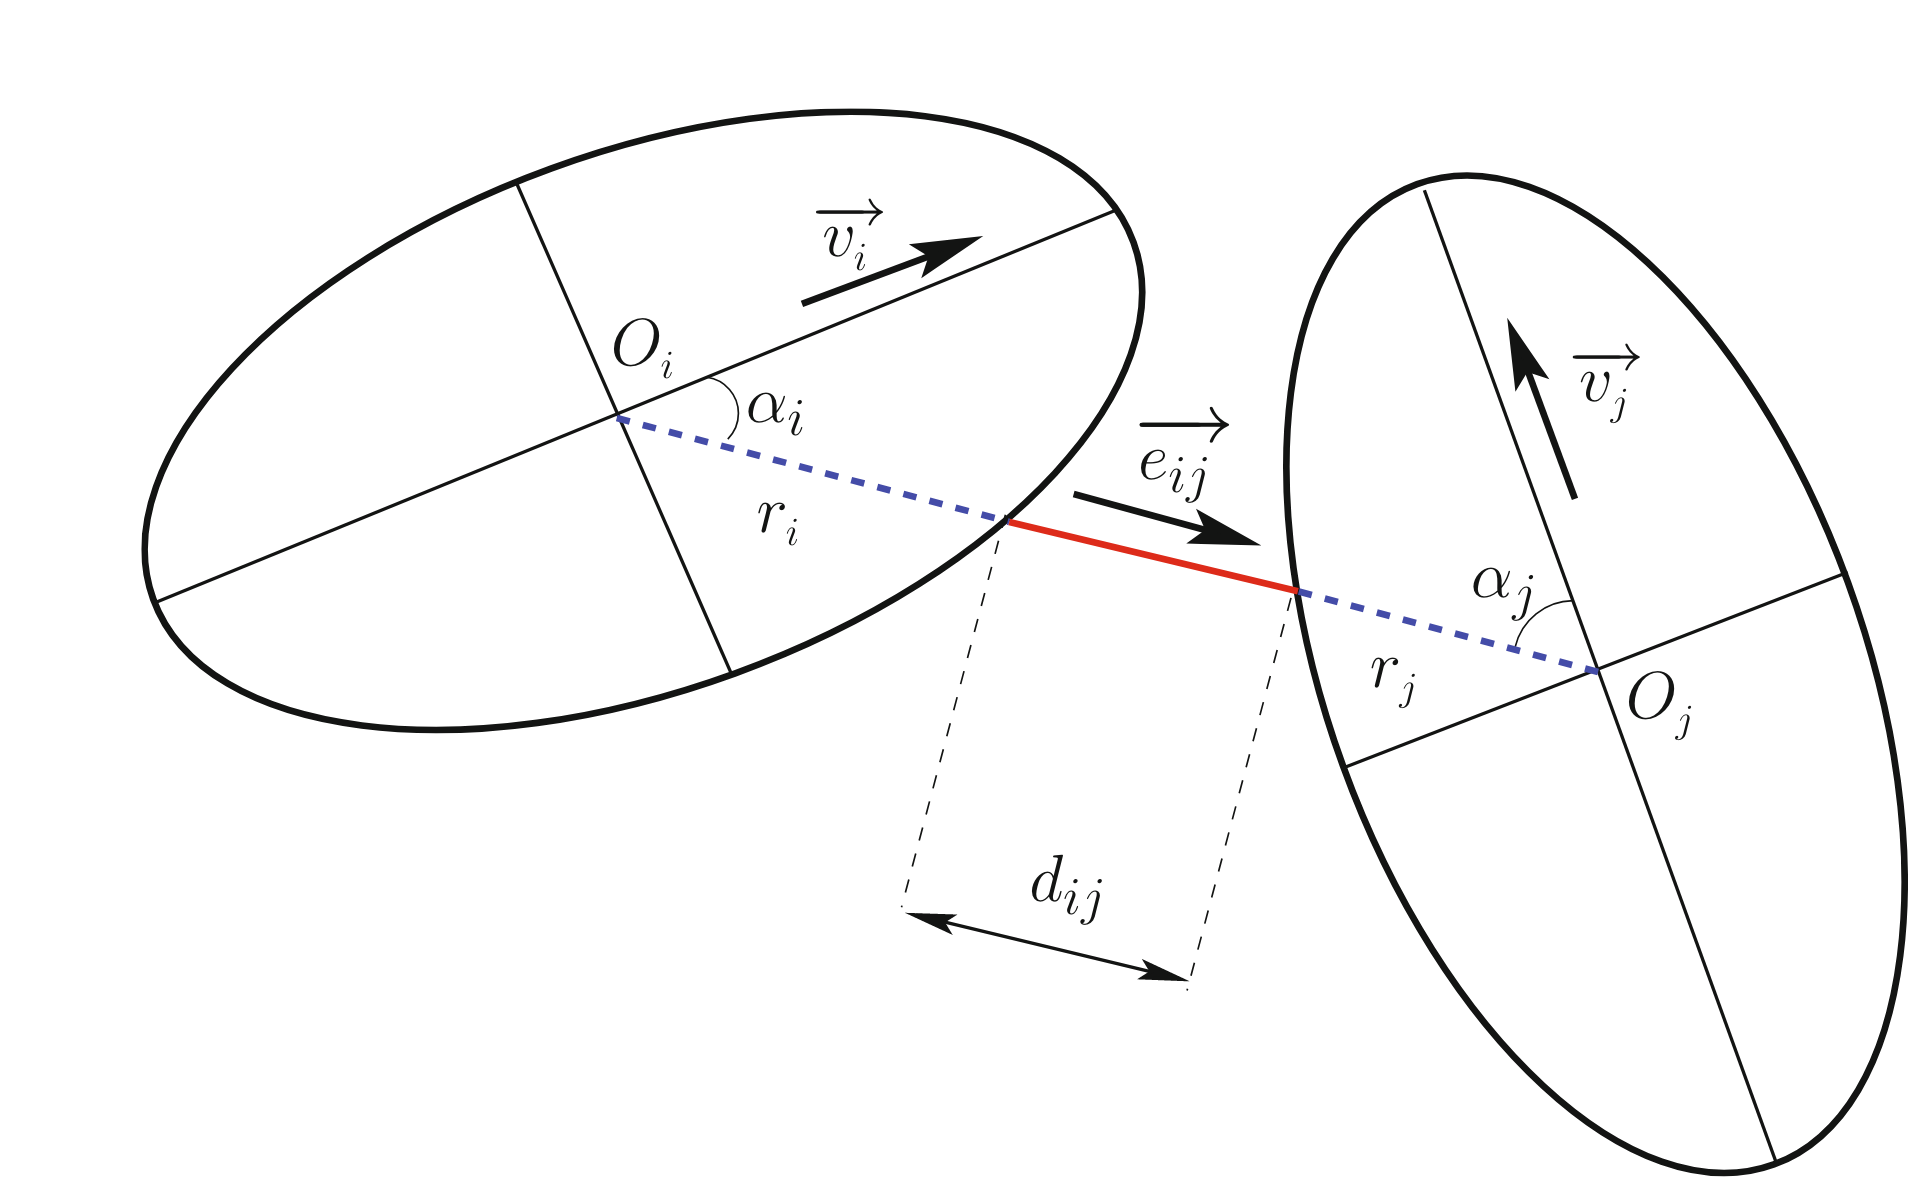 The distance between the borders of the ellipses along a line connecting their centers.